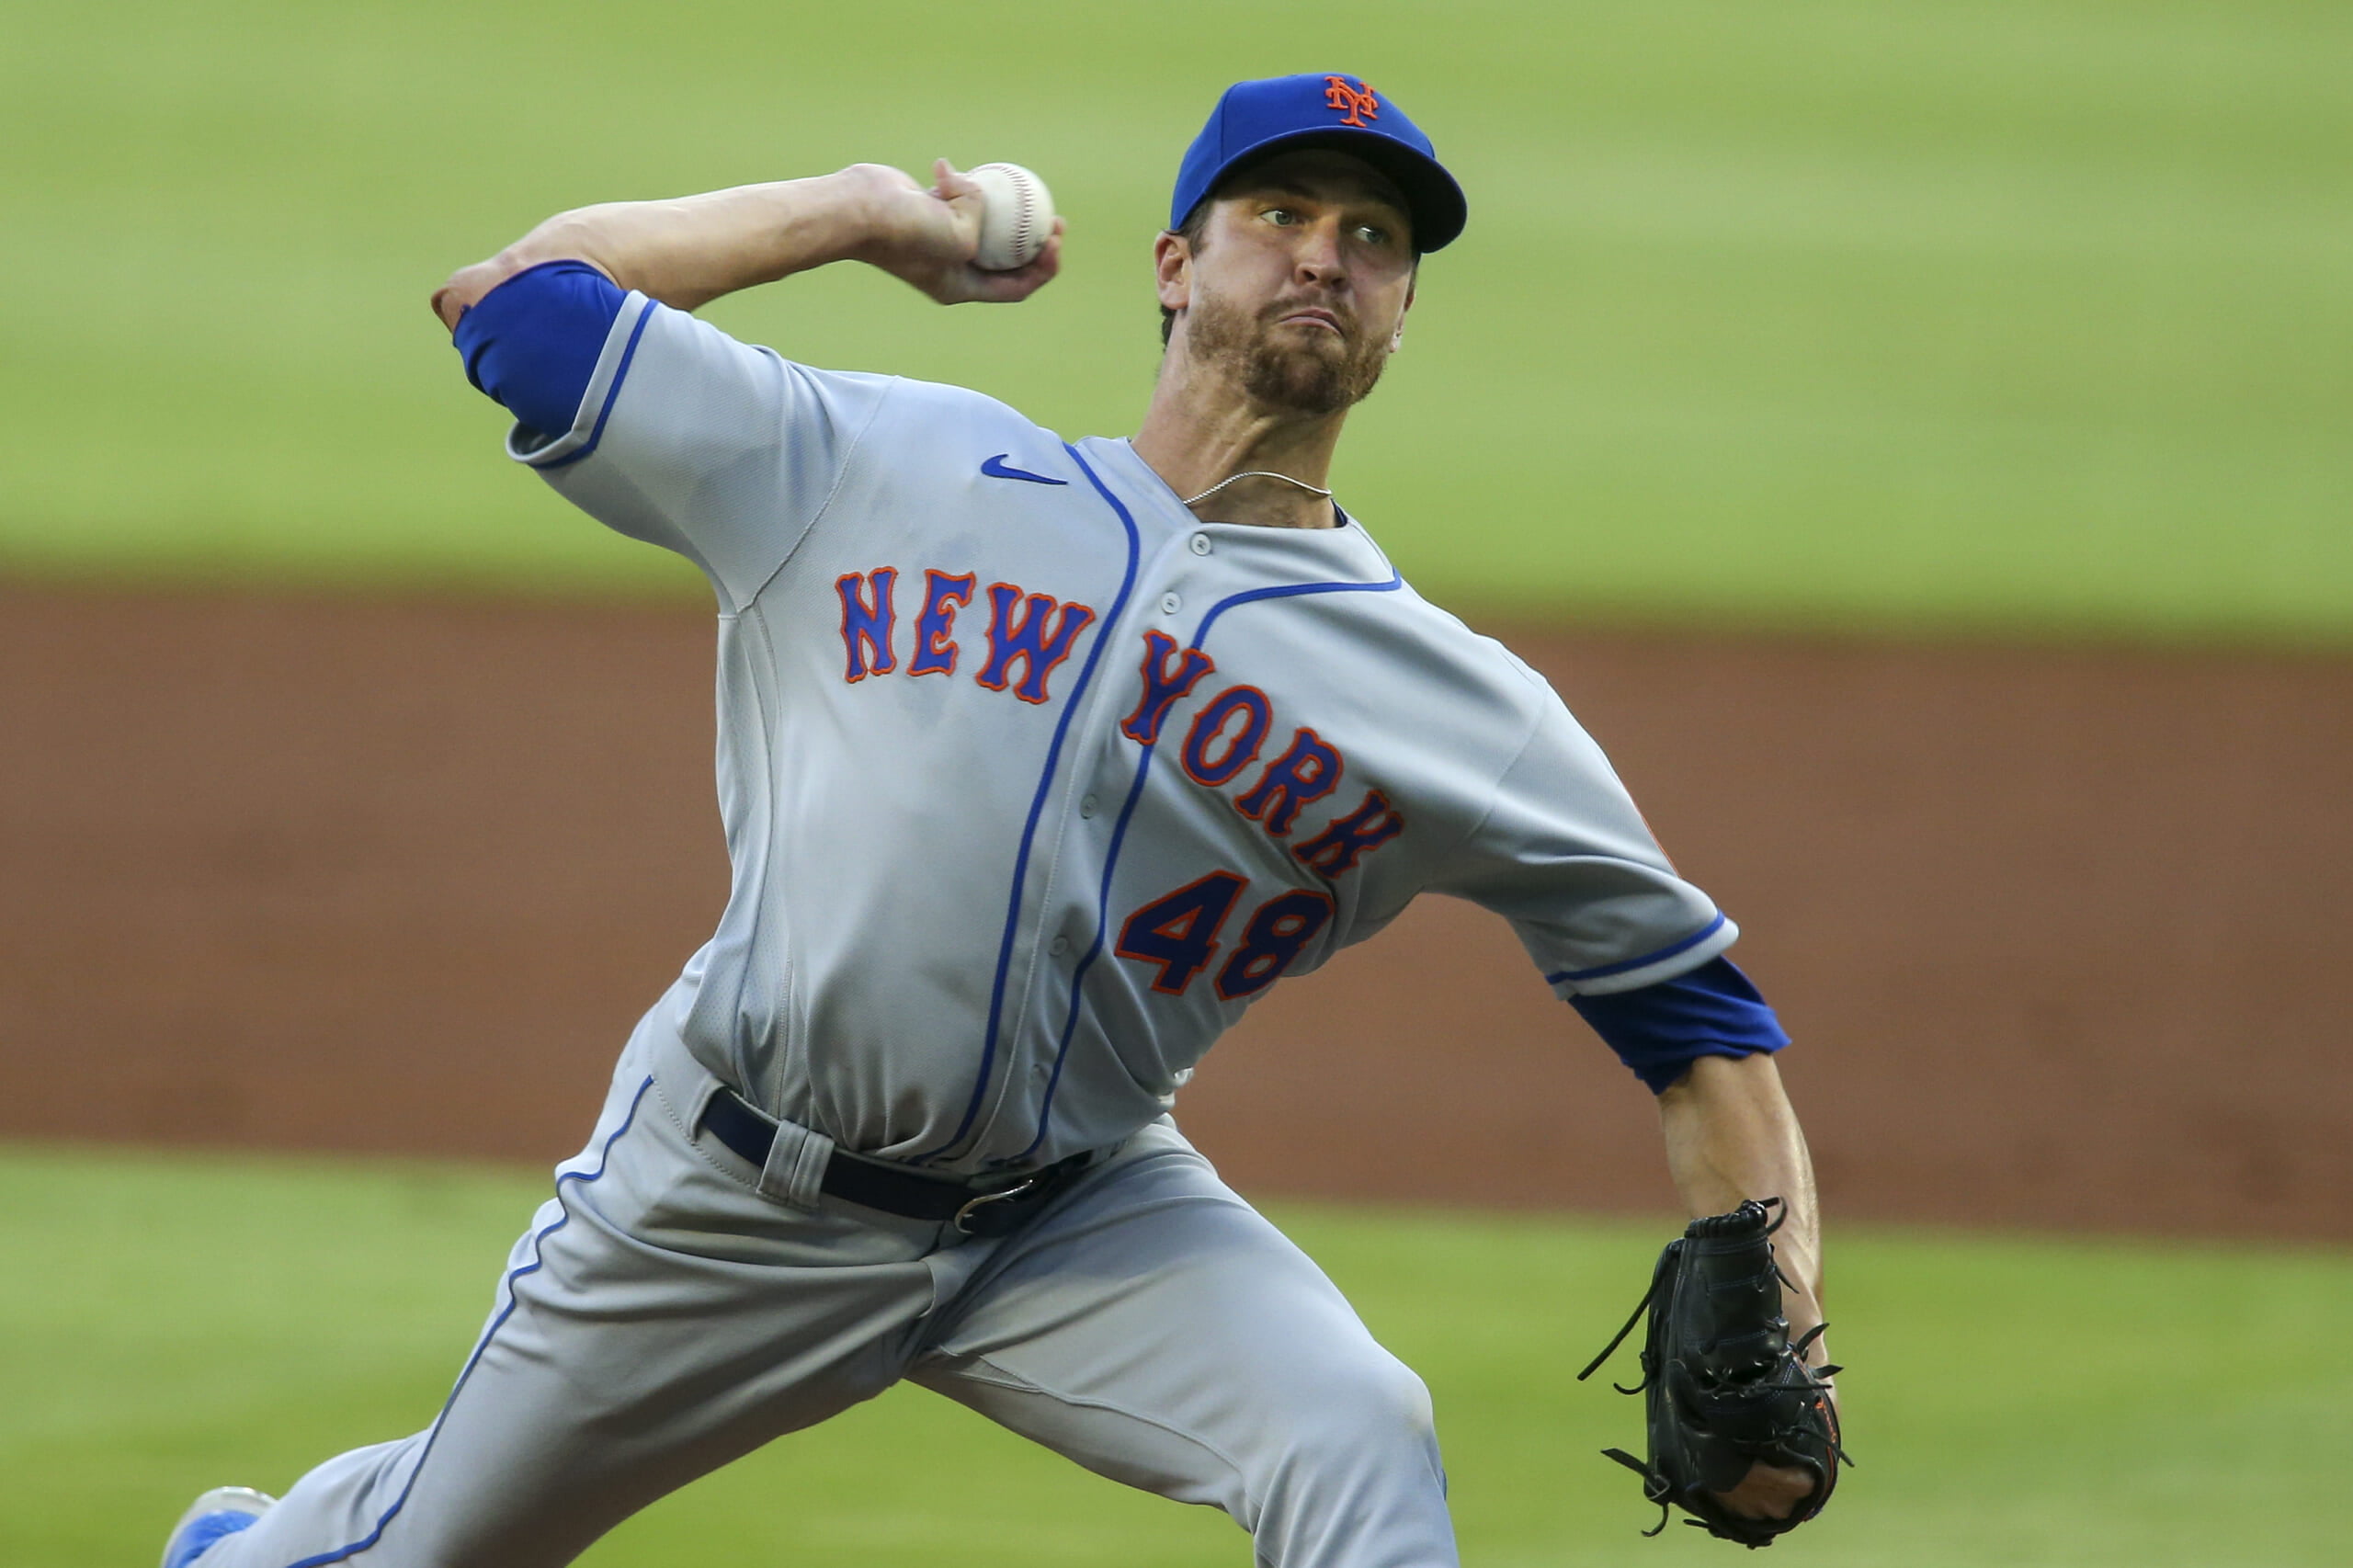 Atlanta Braves favored to land Jacob deGrom if he leaves the Mets